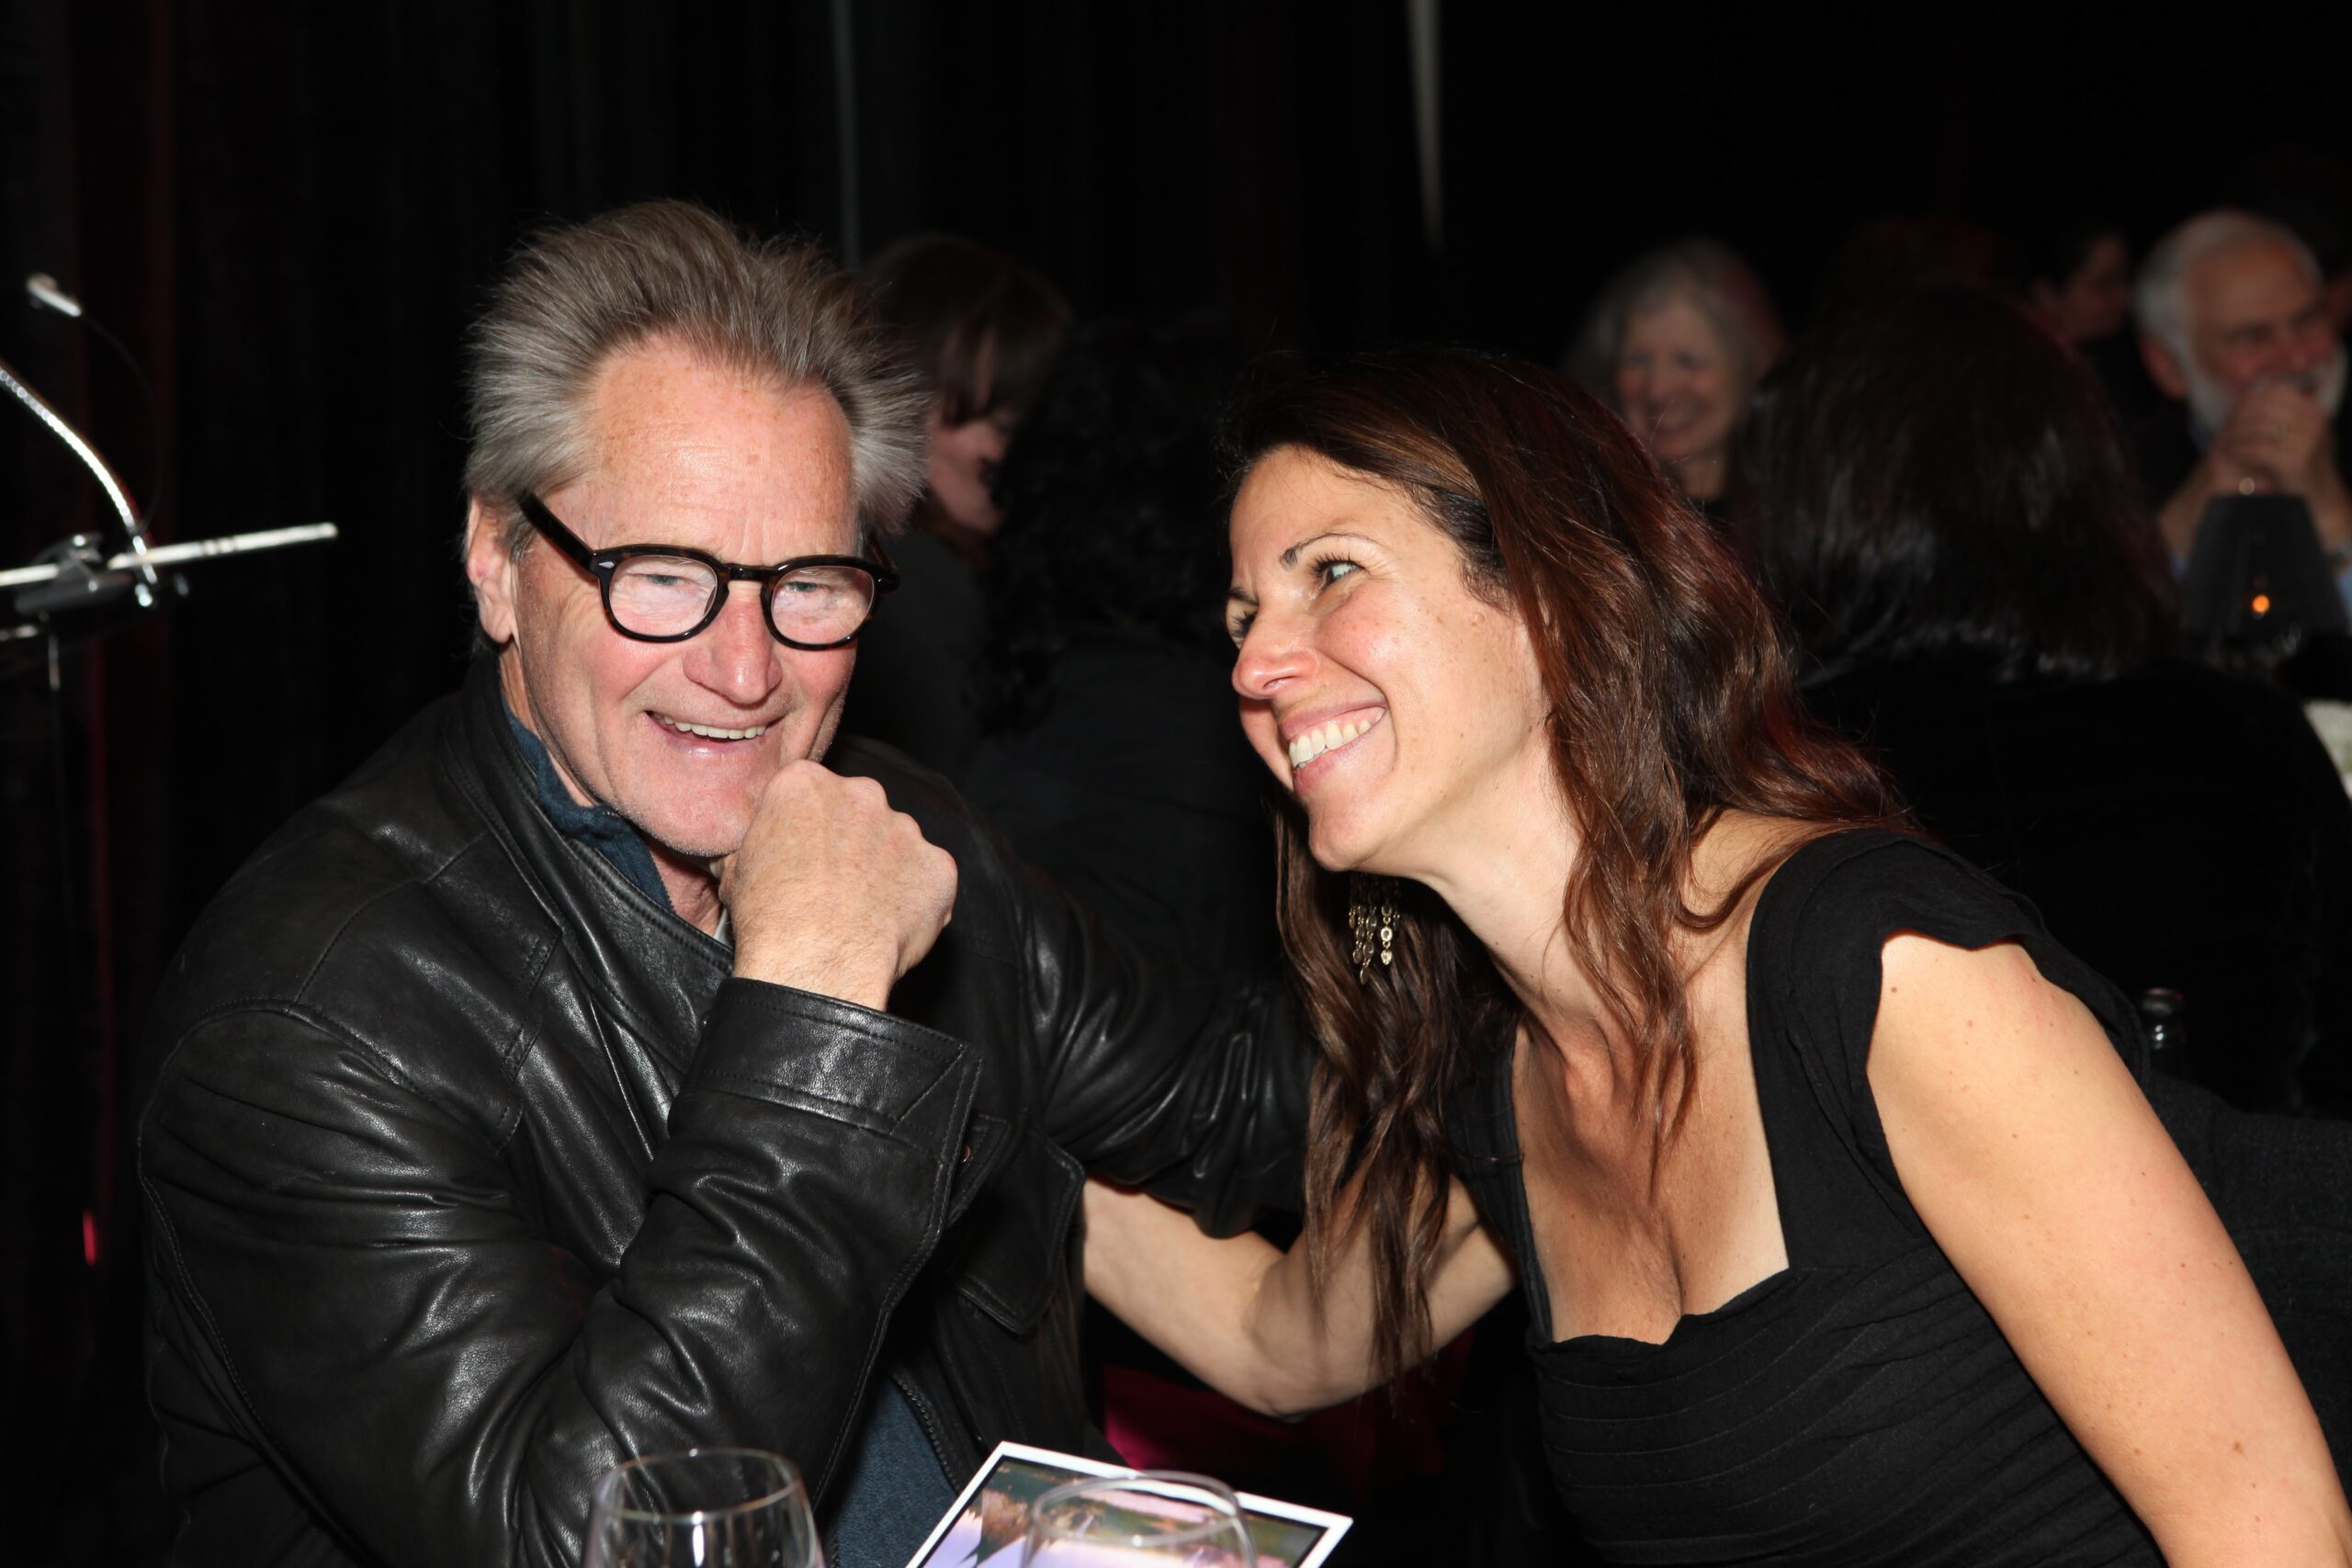 Sam Shepard and Loretta Greco at _An Evening with Sam Shepard at Magic Theatre,_ February 11, 2013